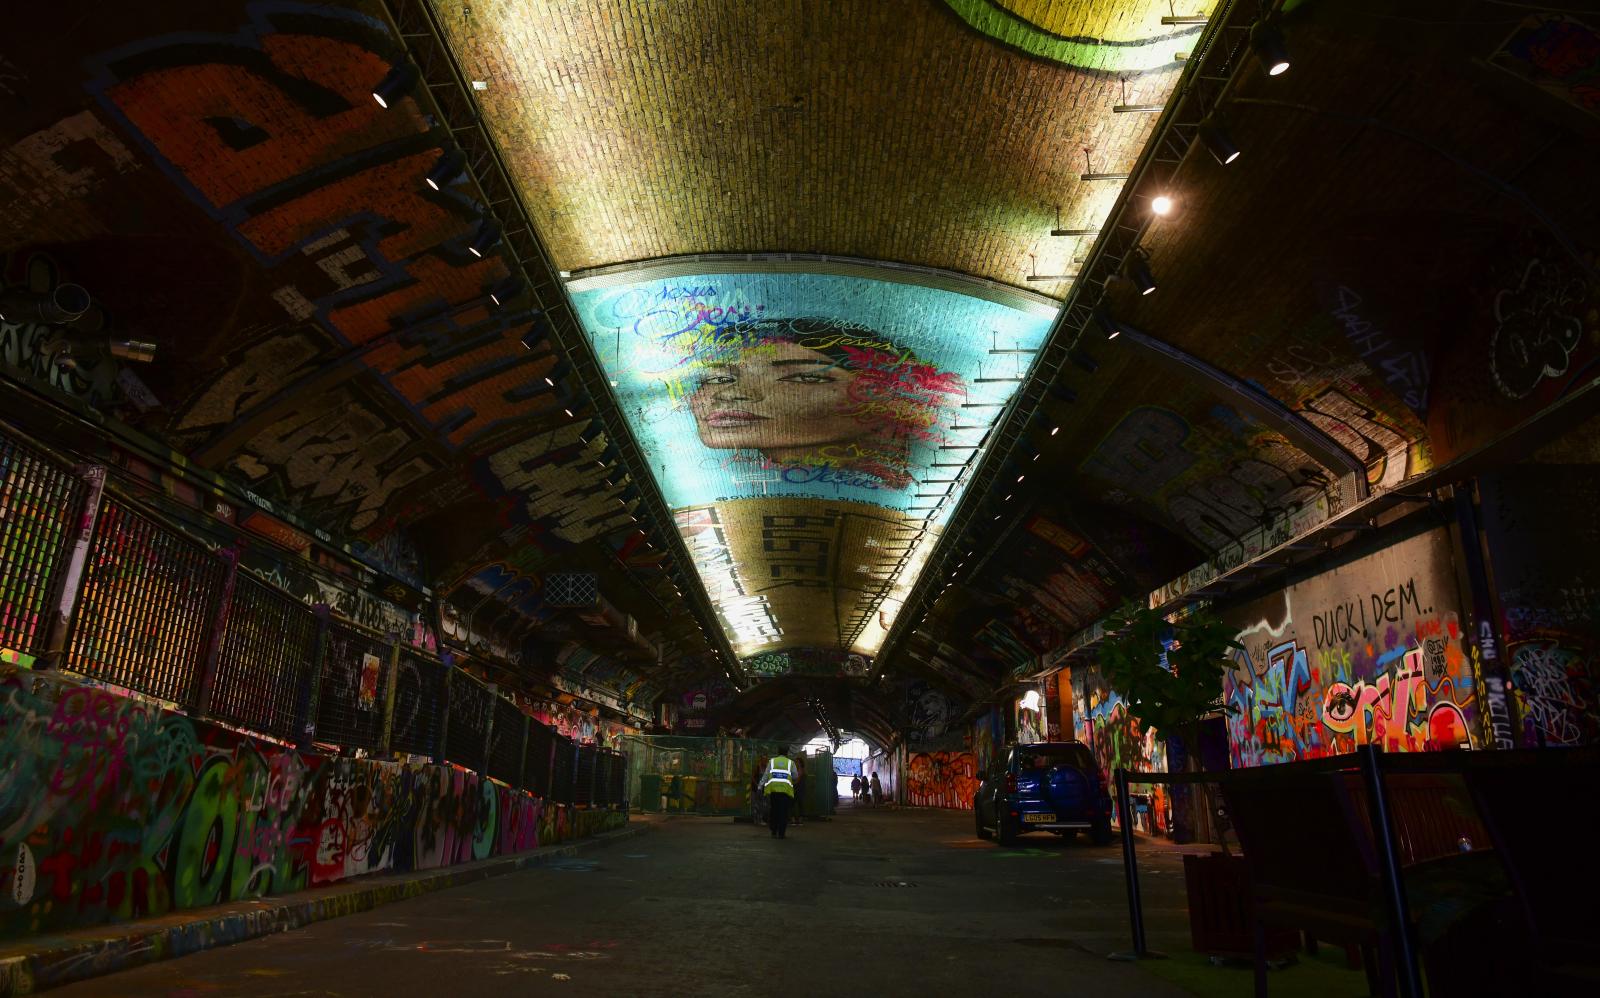 Image from Daily Life UK - Leake St Tunnel known as the Banksy Tunnel near the...